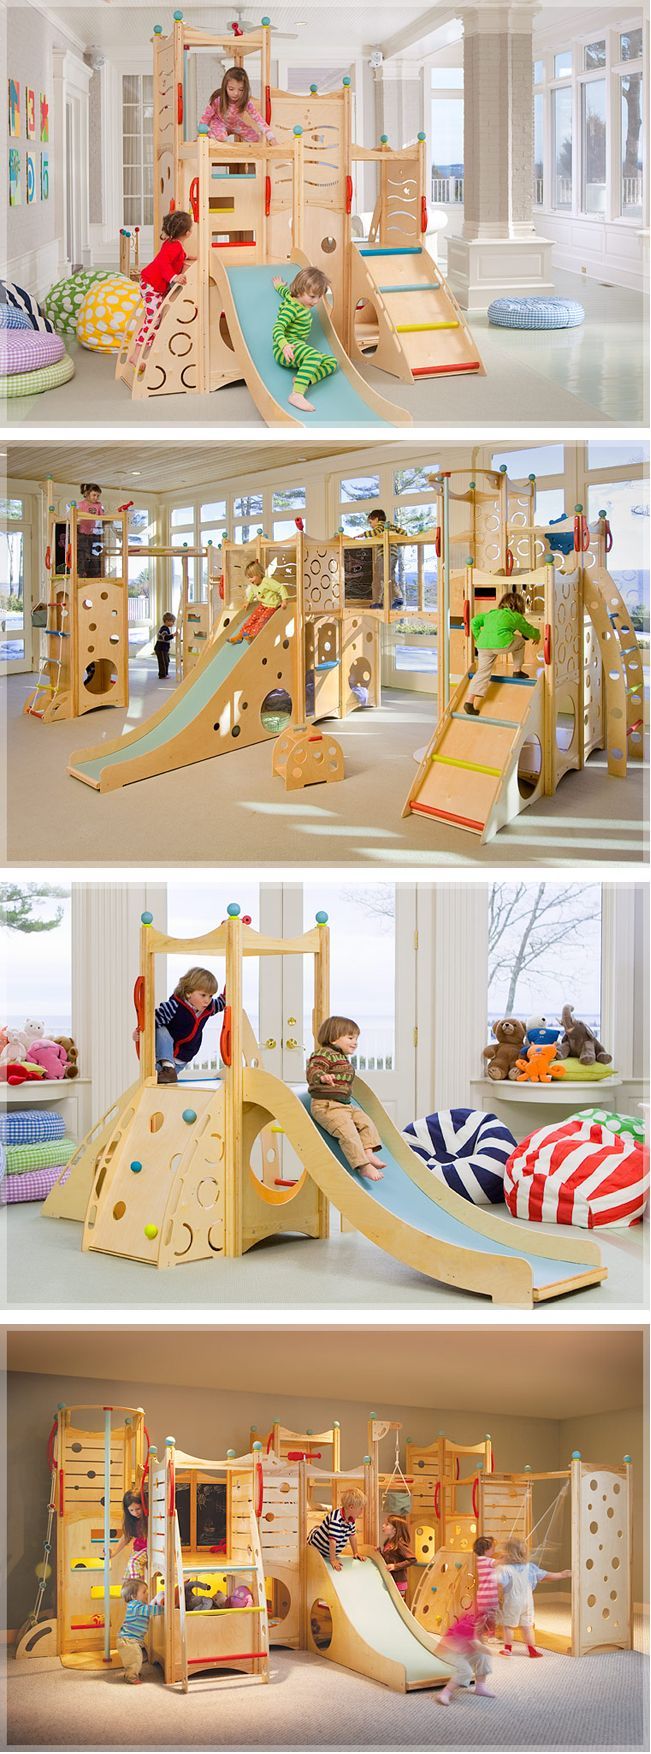 Awesome indoor play area! – Okay, t